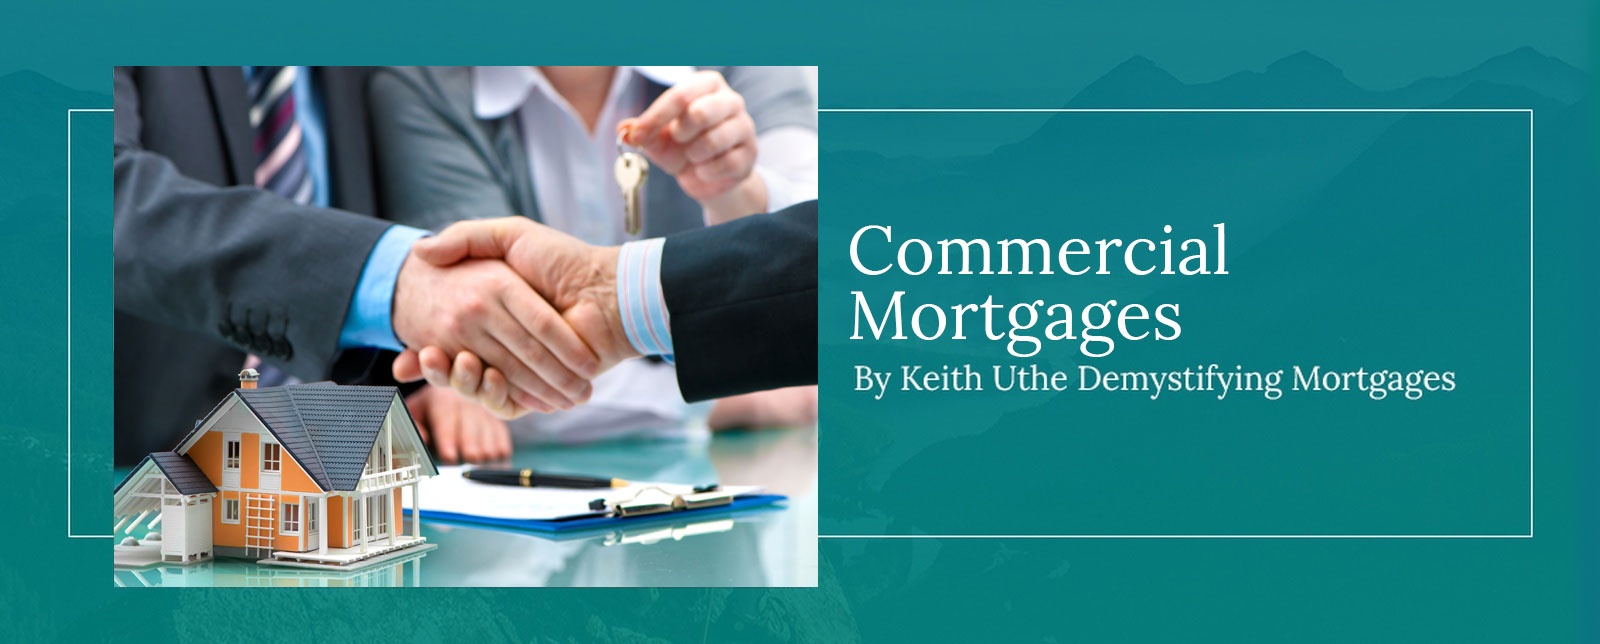 Mortgage Services Edmonton AB by Keith Uthe Demystifying Mortgages